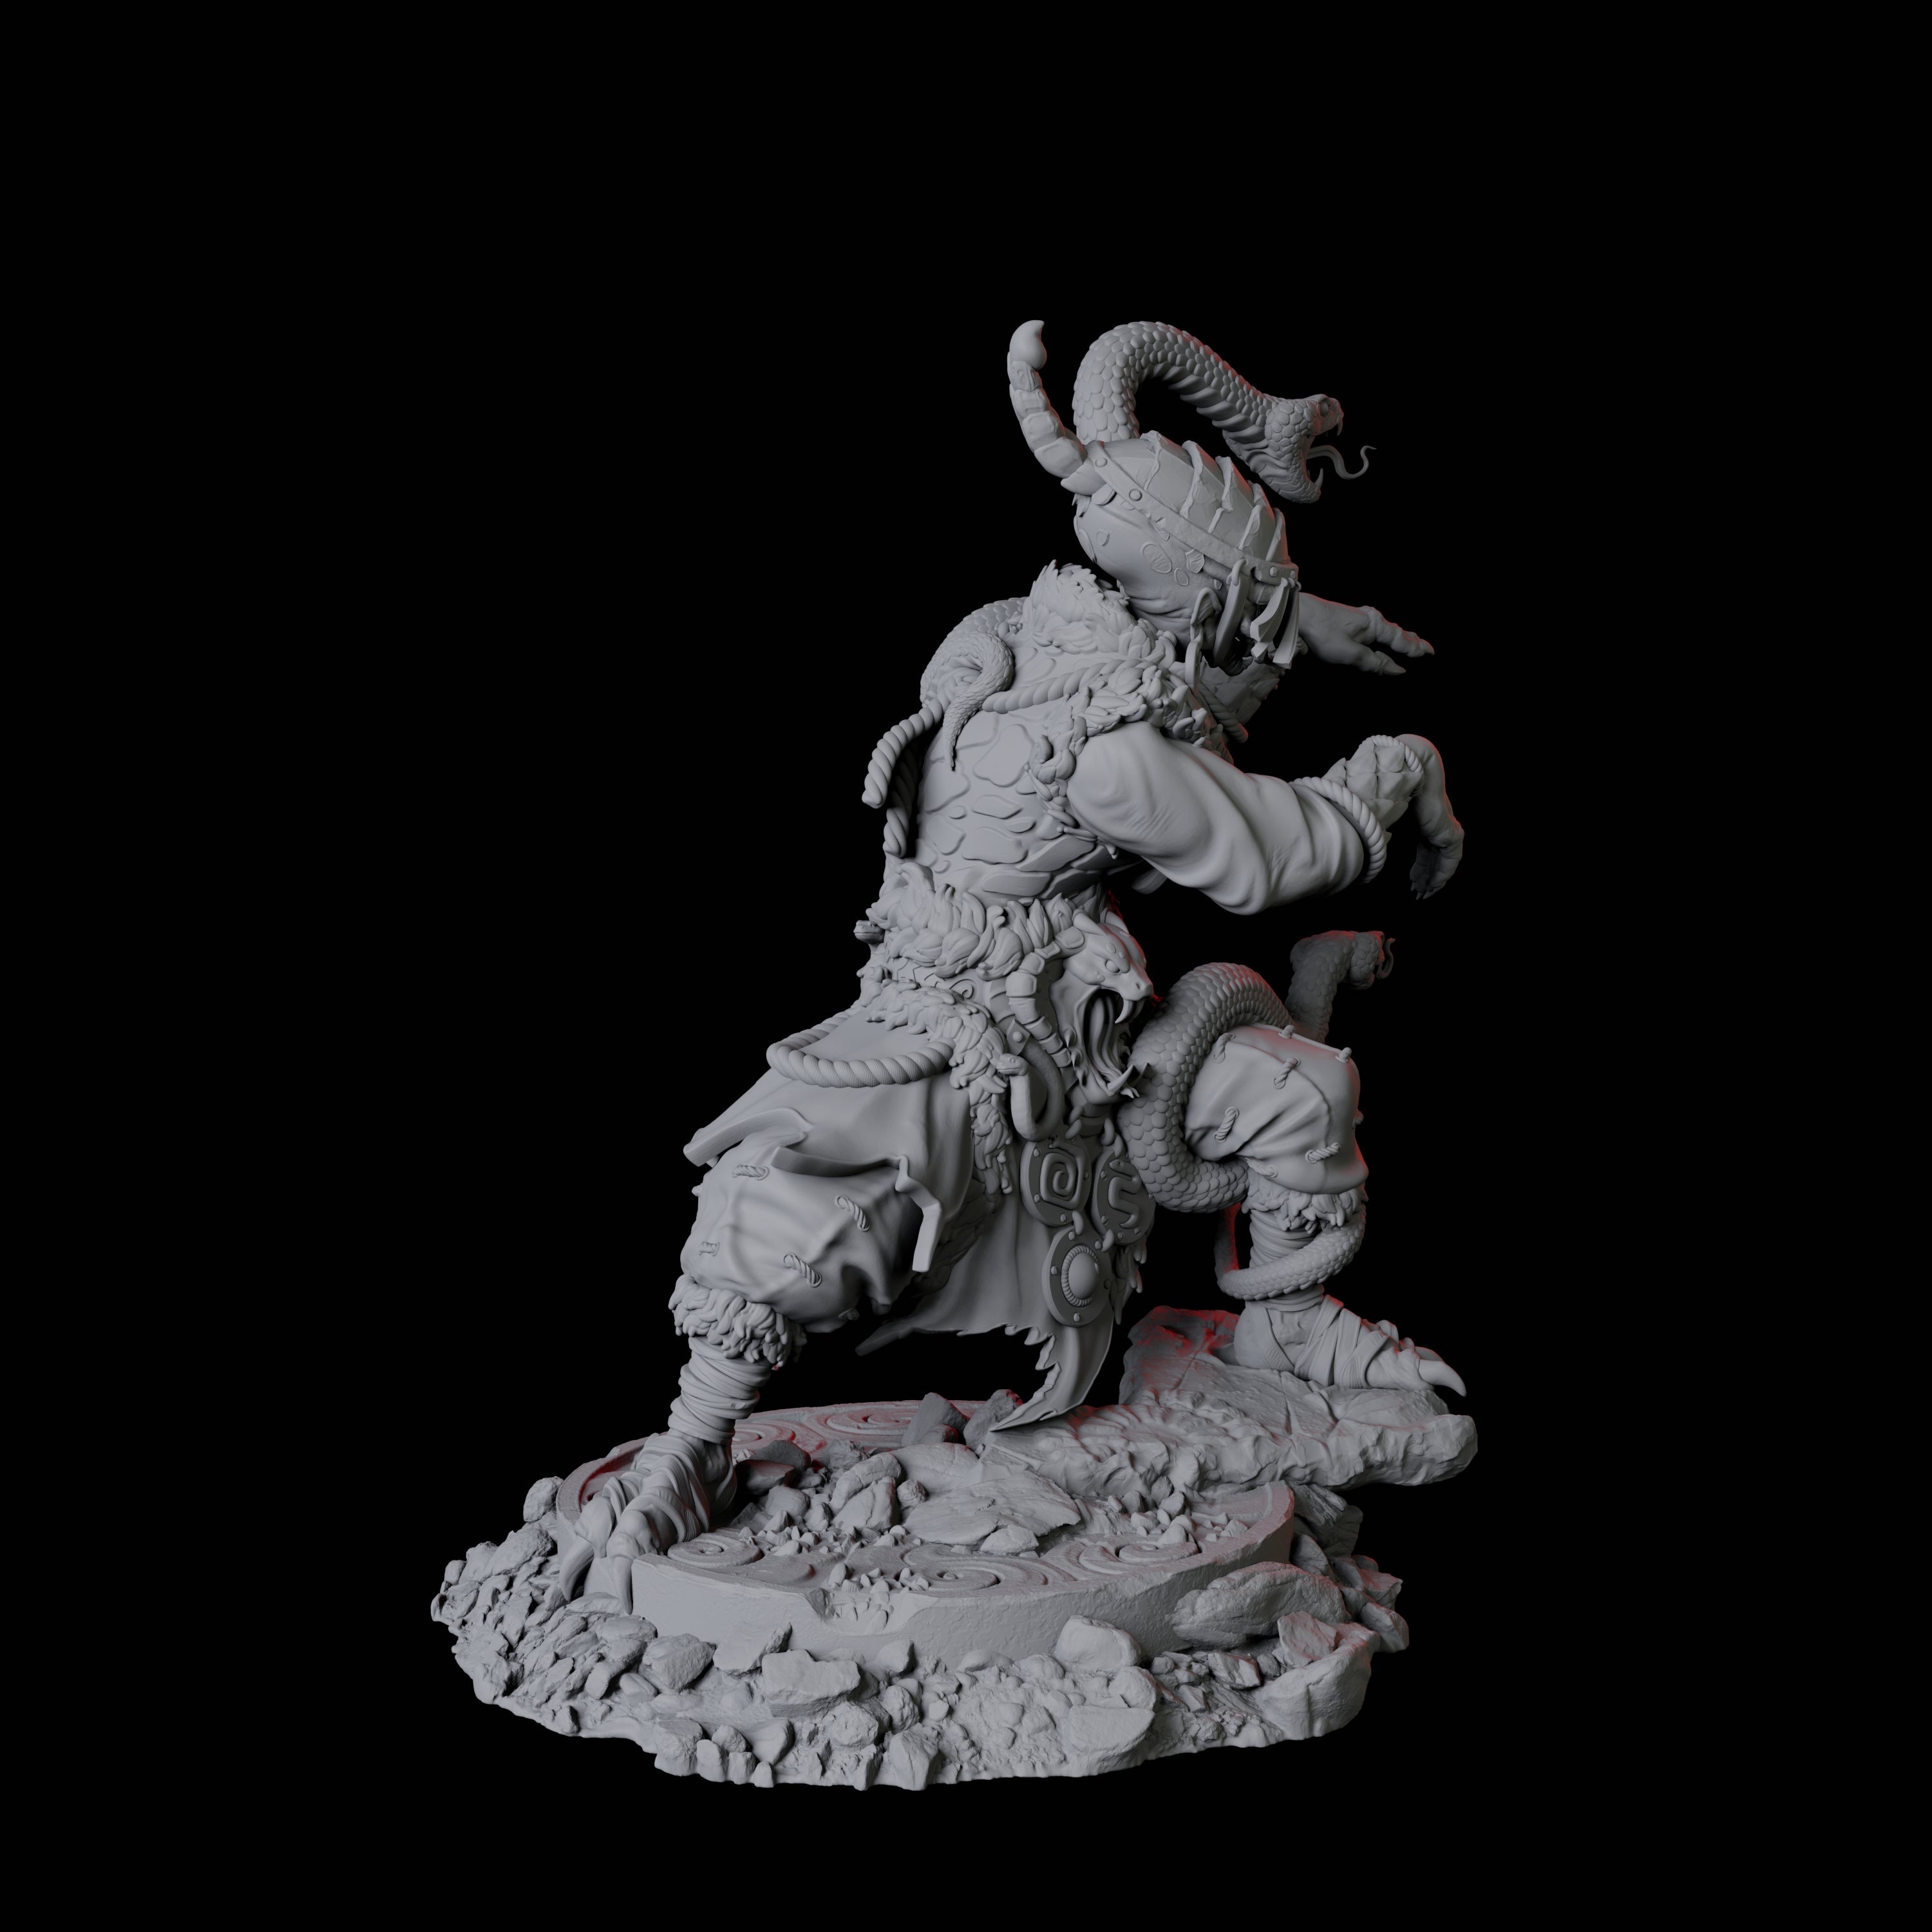 Four Yuan-Ti Snake Charmers Miniature for Dungeons and Dragons, Pathfinder or other TTRPGs